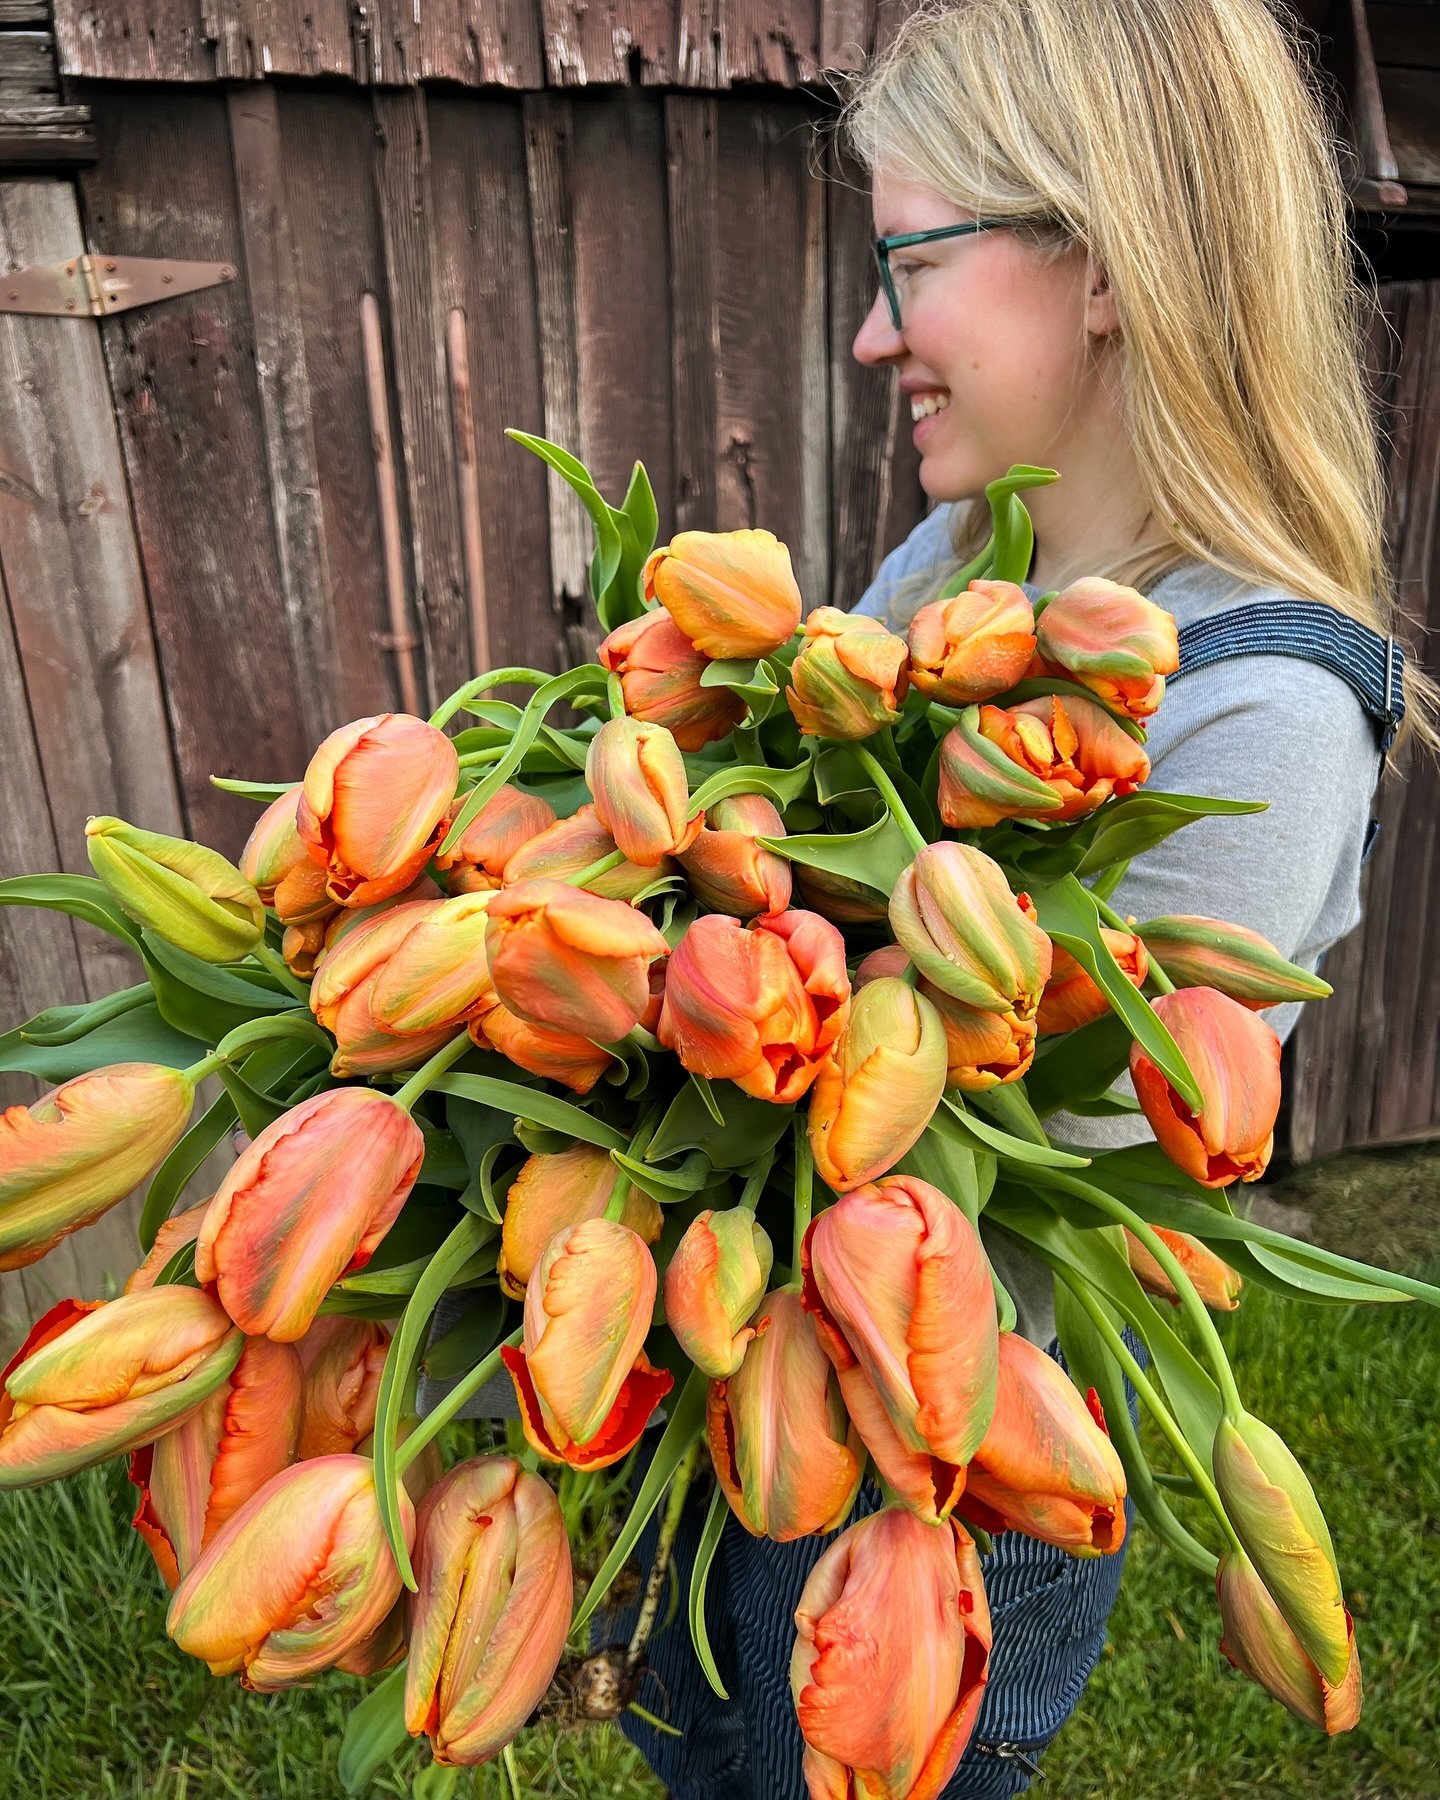 There&rsquo;s never a bad day for flowers.

Avignon Parrot tulip.
.
.
.
#tulips #tulipseason #springflowers #mayfieldfarm #mayfieldfarmwv #morgantownflowerfarm #flowerfarm #flowerfarmer #womenwhofarm #farmher #womeninag #buylocal #localflowers #morga